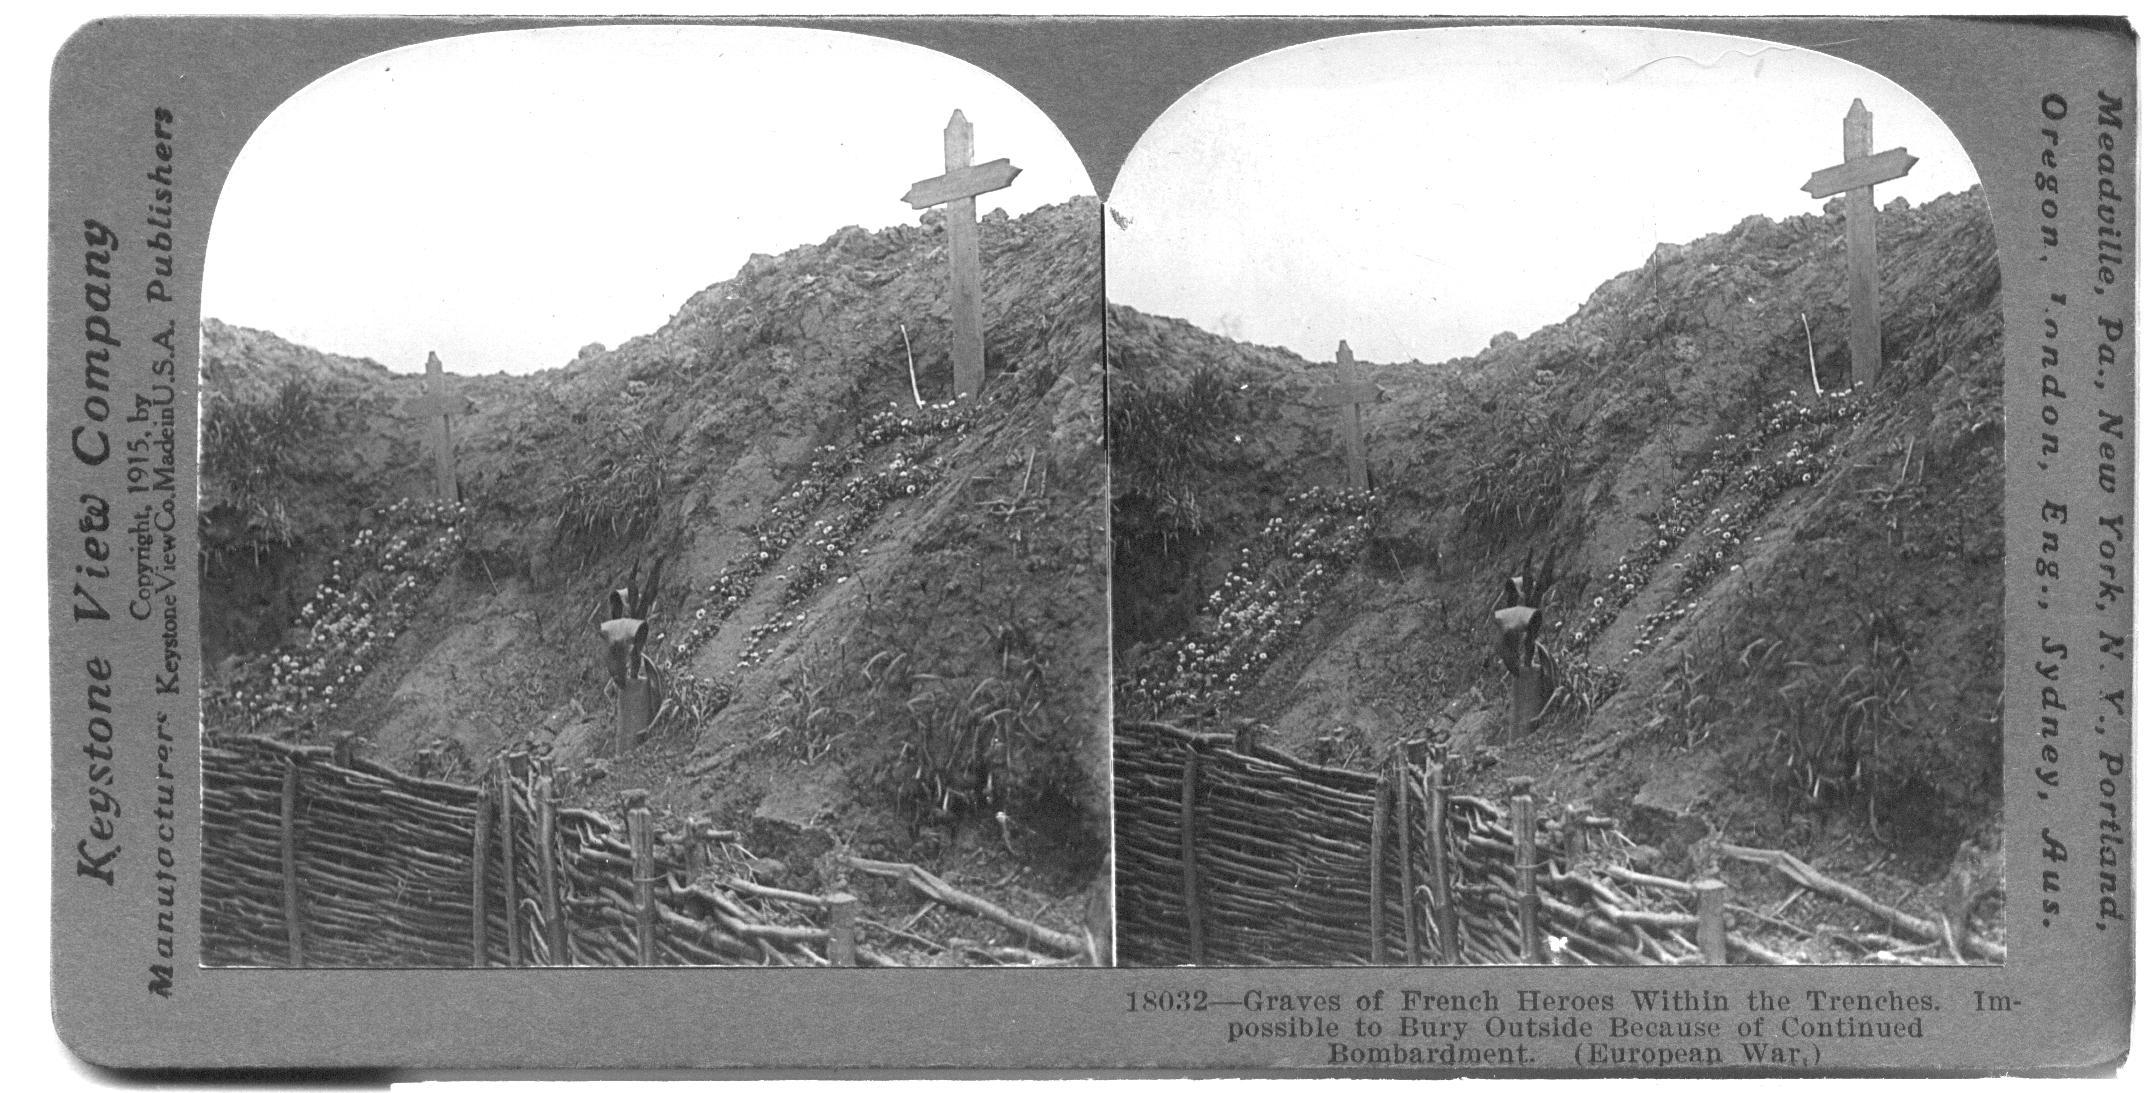 Graves of French Heroes Within the Trenches, Impossible to Bury Outside Because of Continued Bombardment (European War)